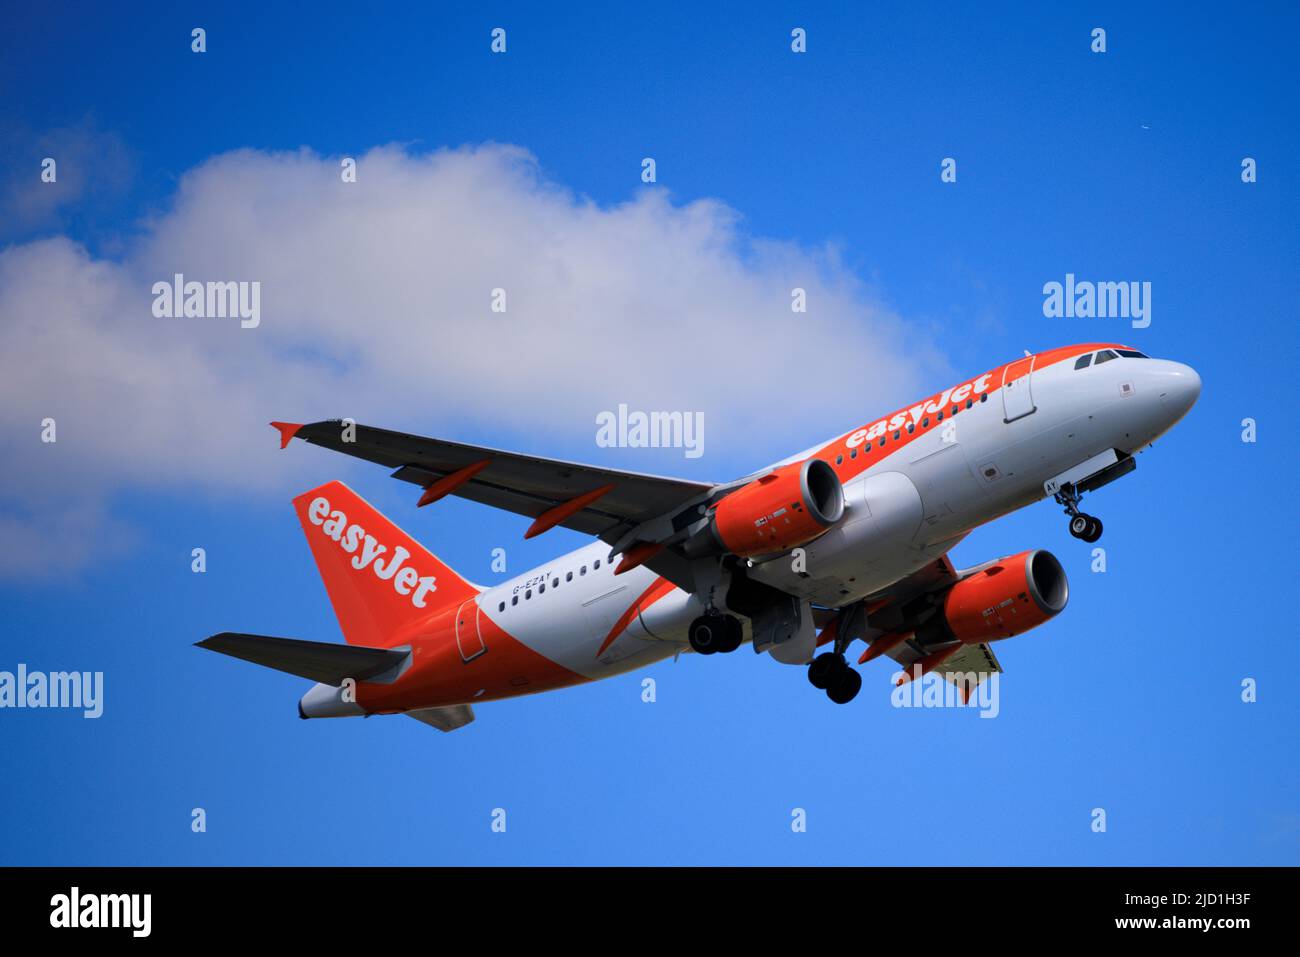 An Easyjet plane takes off on the runway at Gatwick Airport Stock Photo